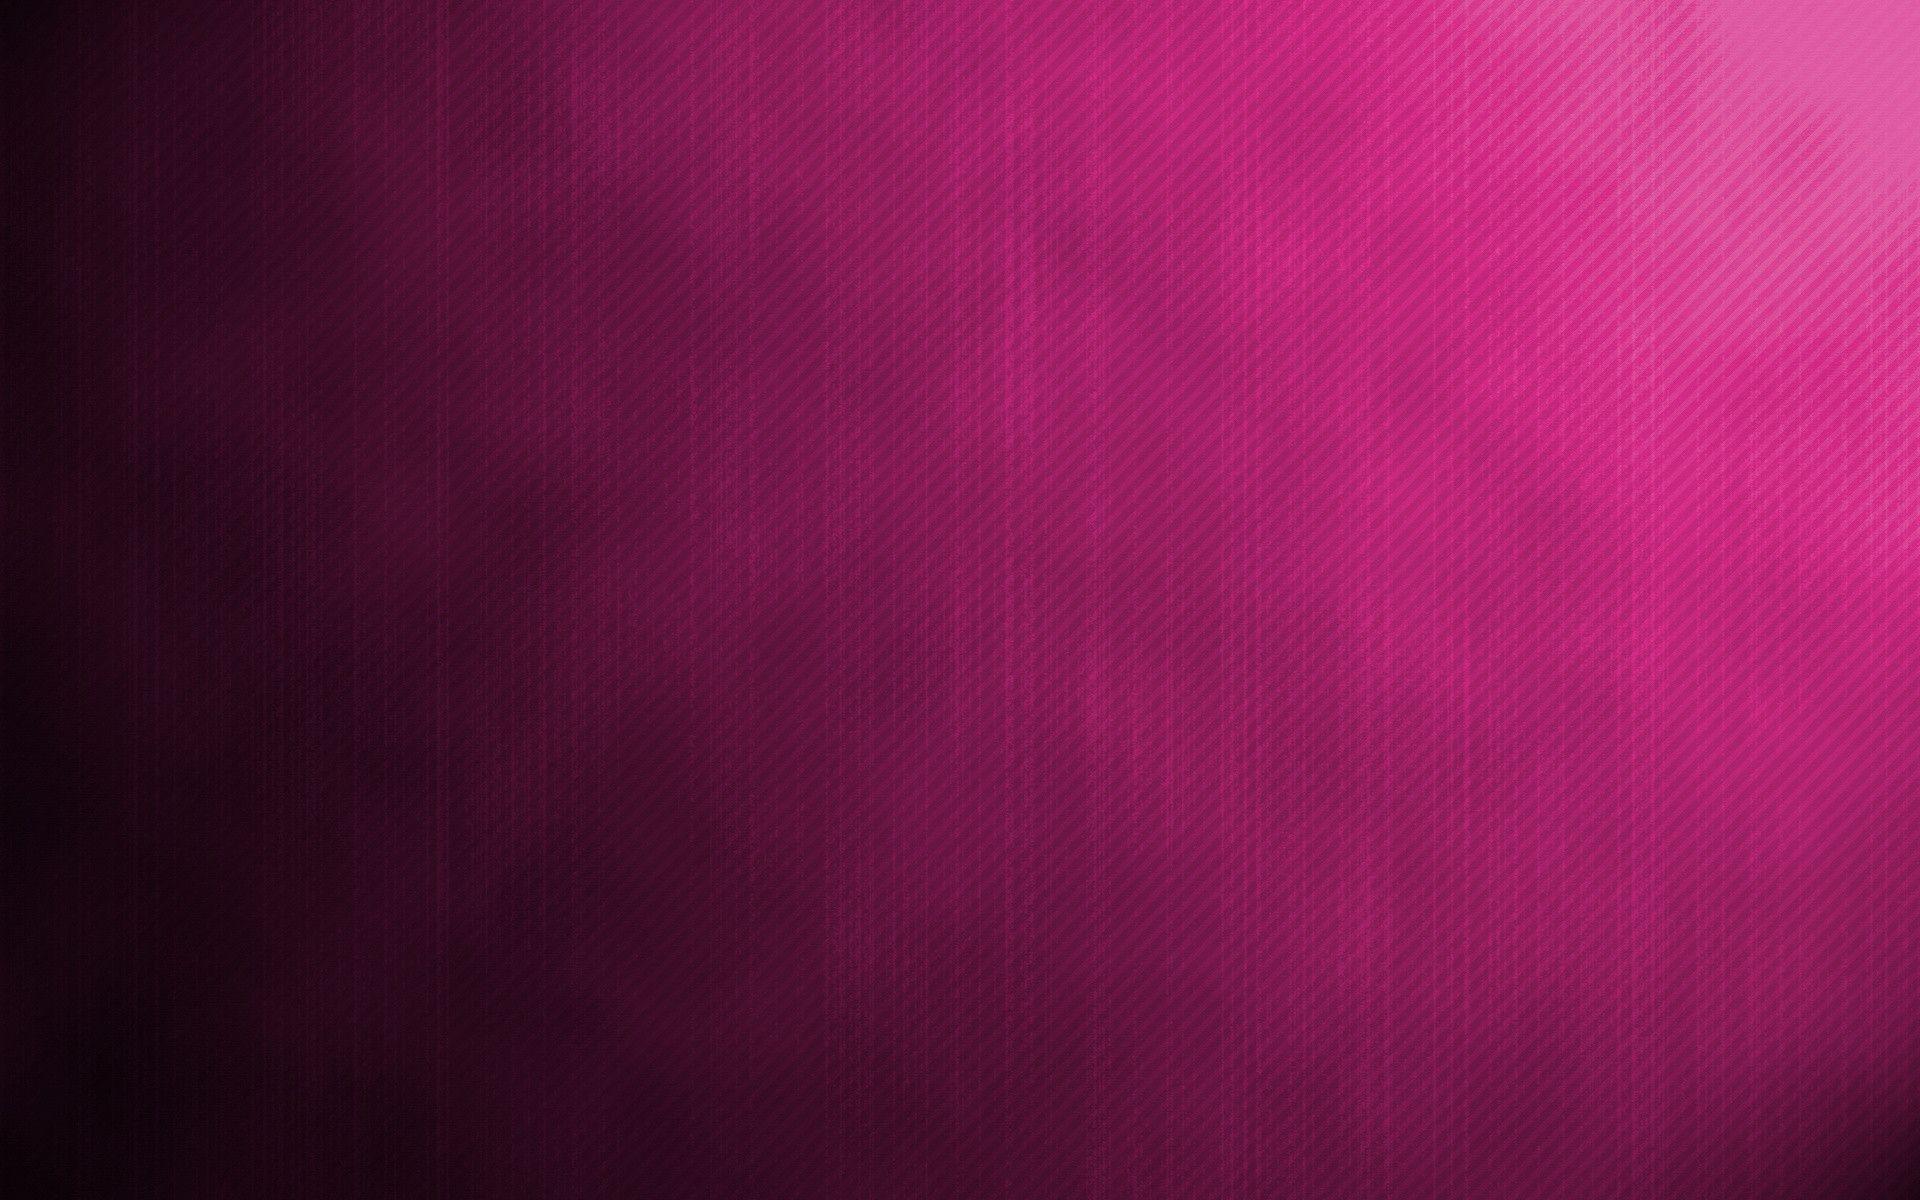 Simply Pink HD resolution background image